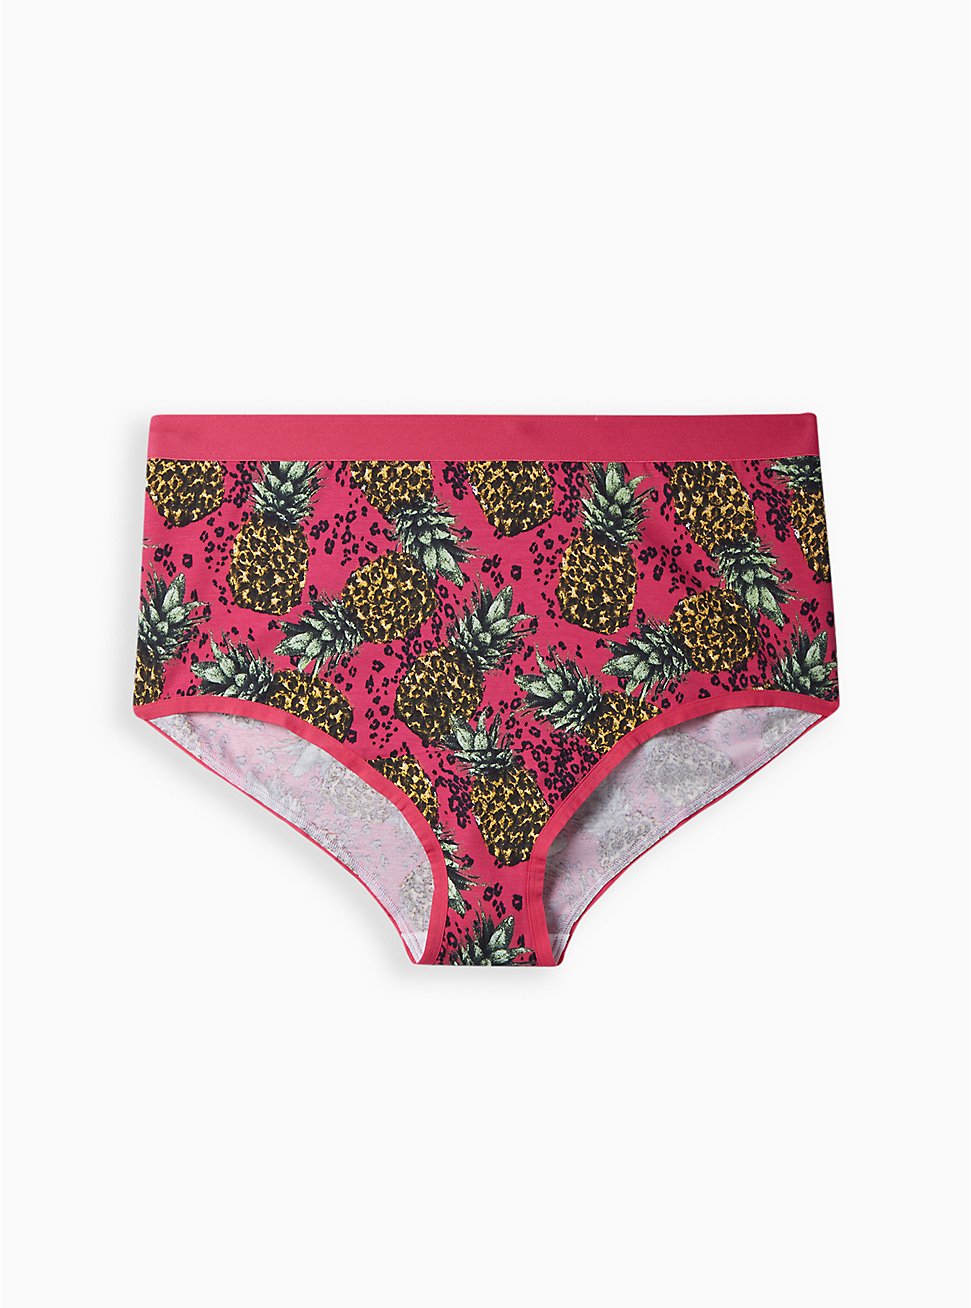 Brief Panty - Cotton Pineapples Pink, , hi-res